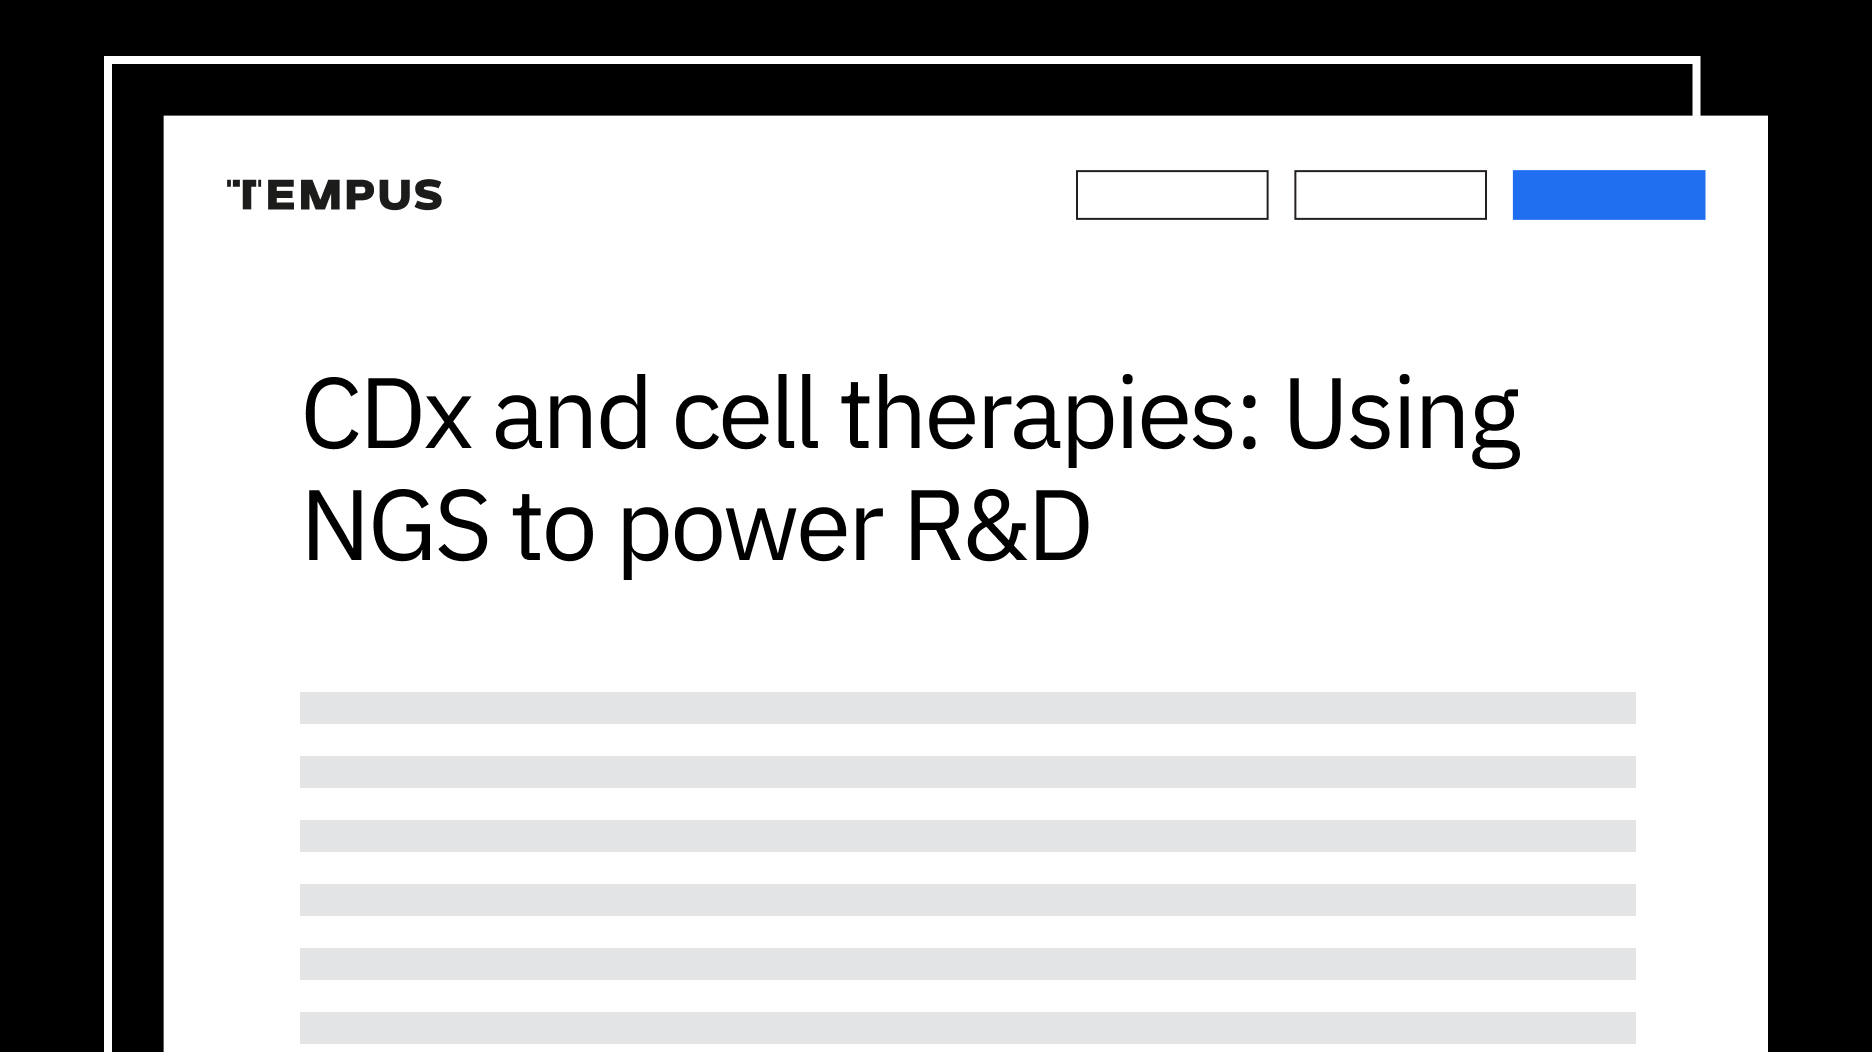 CDx and cell therapies: Using NGS to power R&D